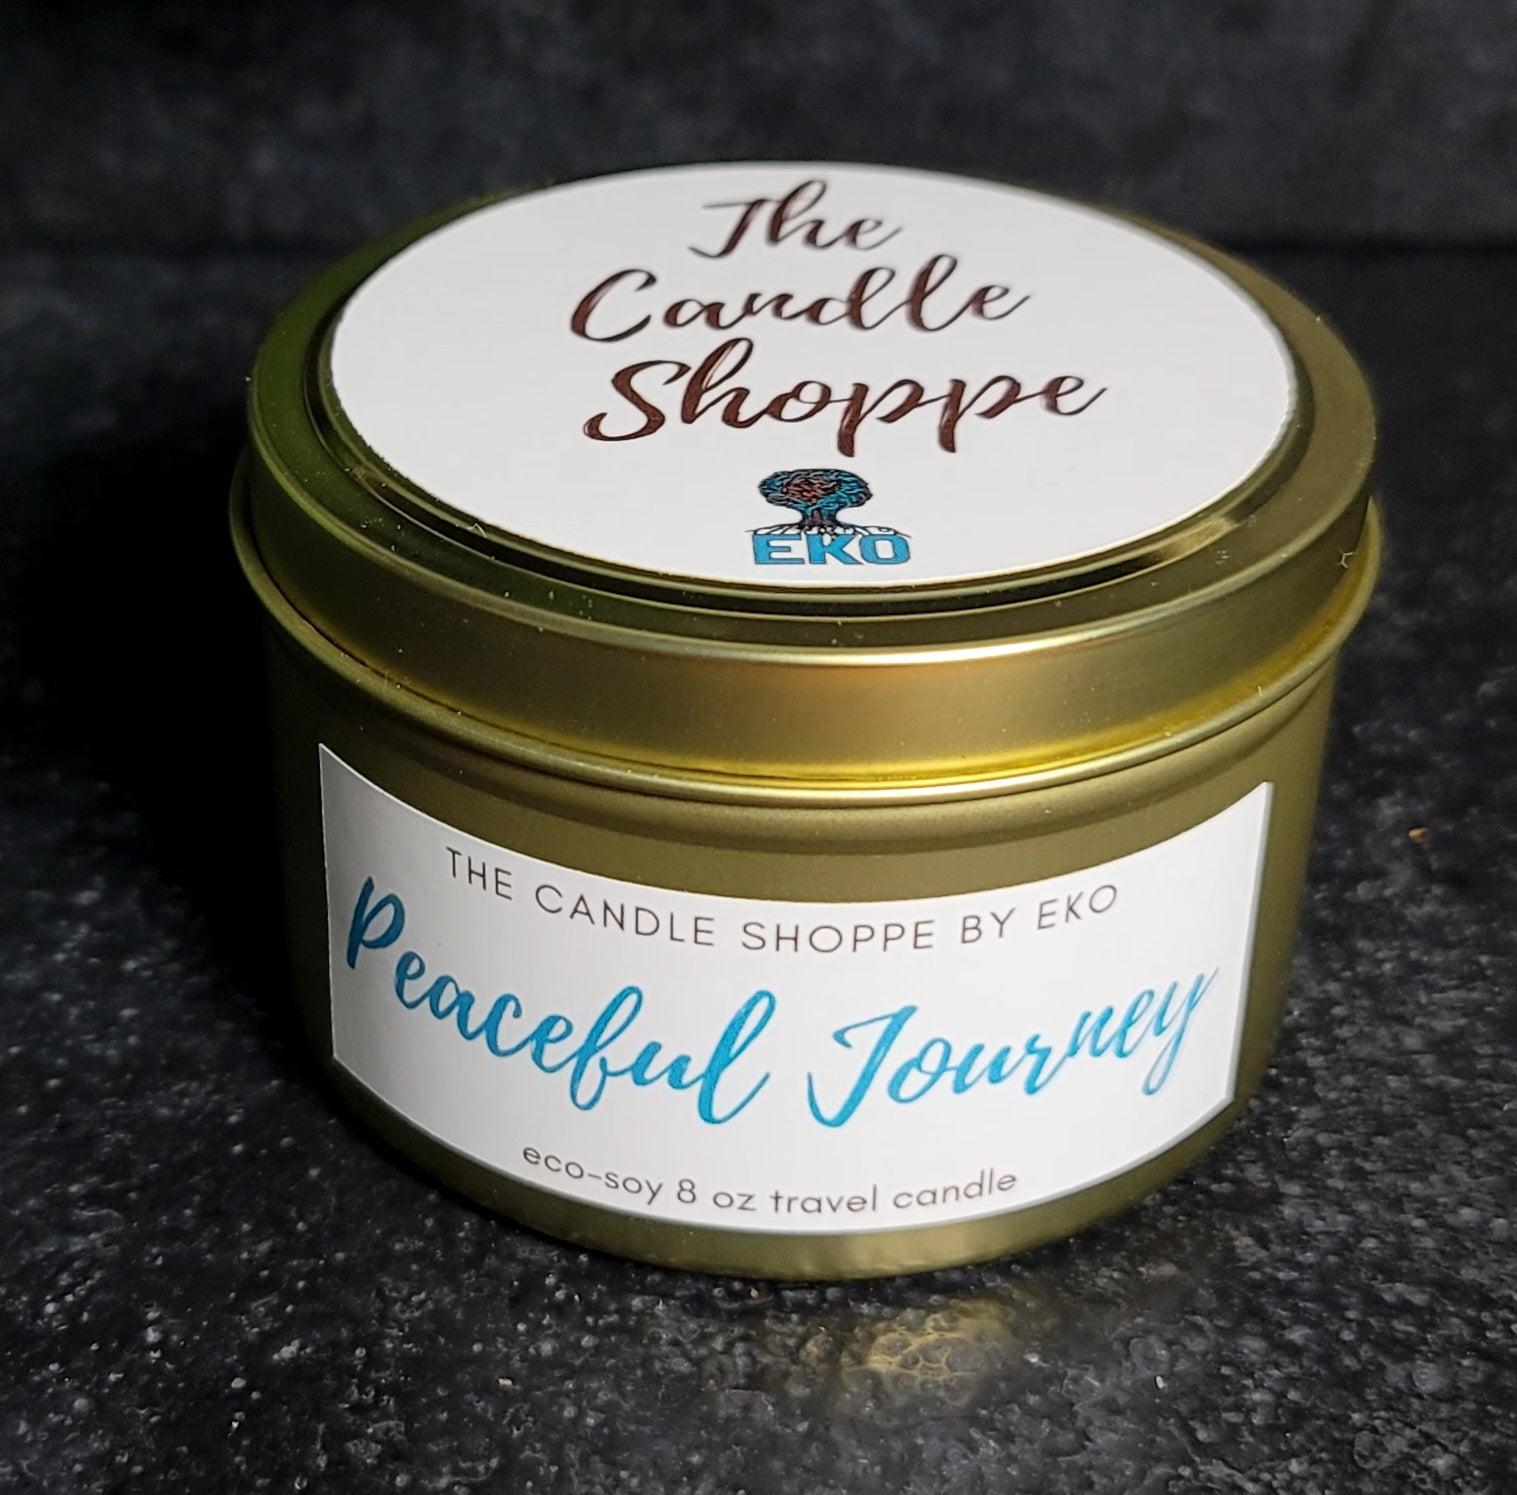 Peaceful Journey Candle